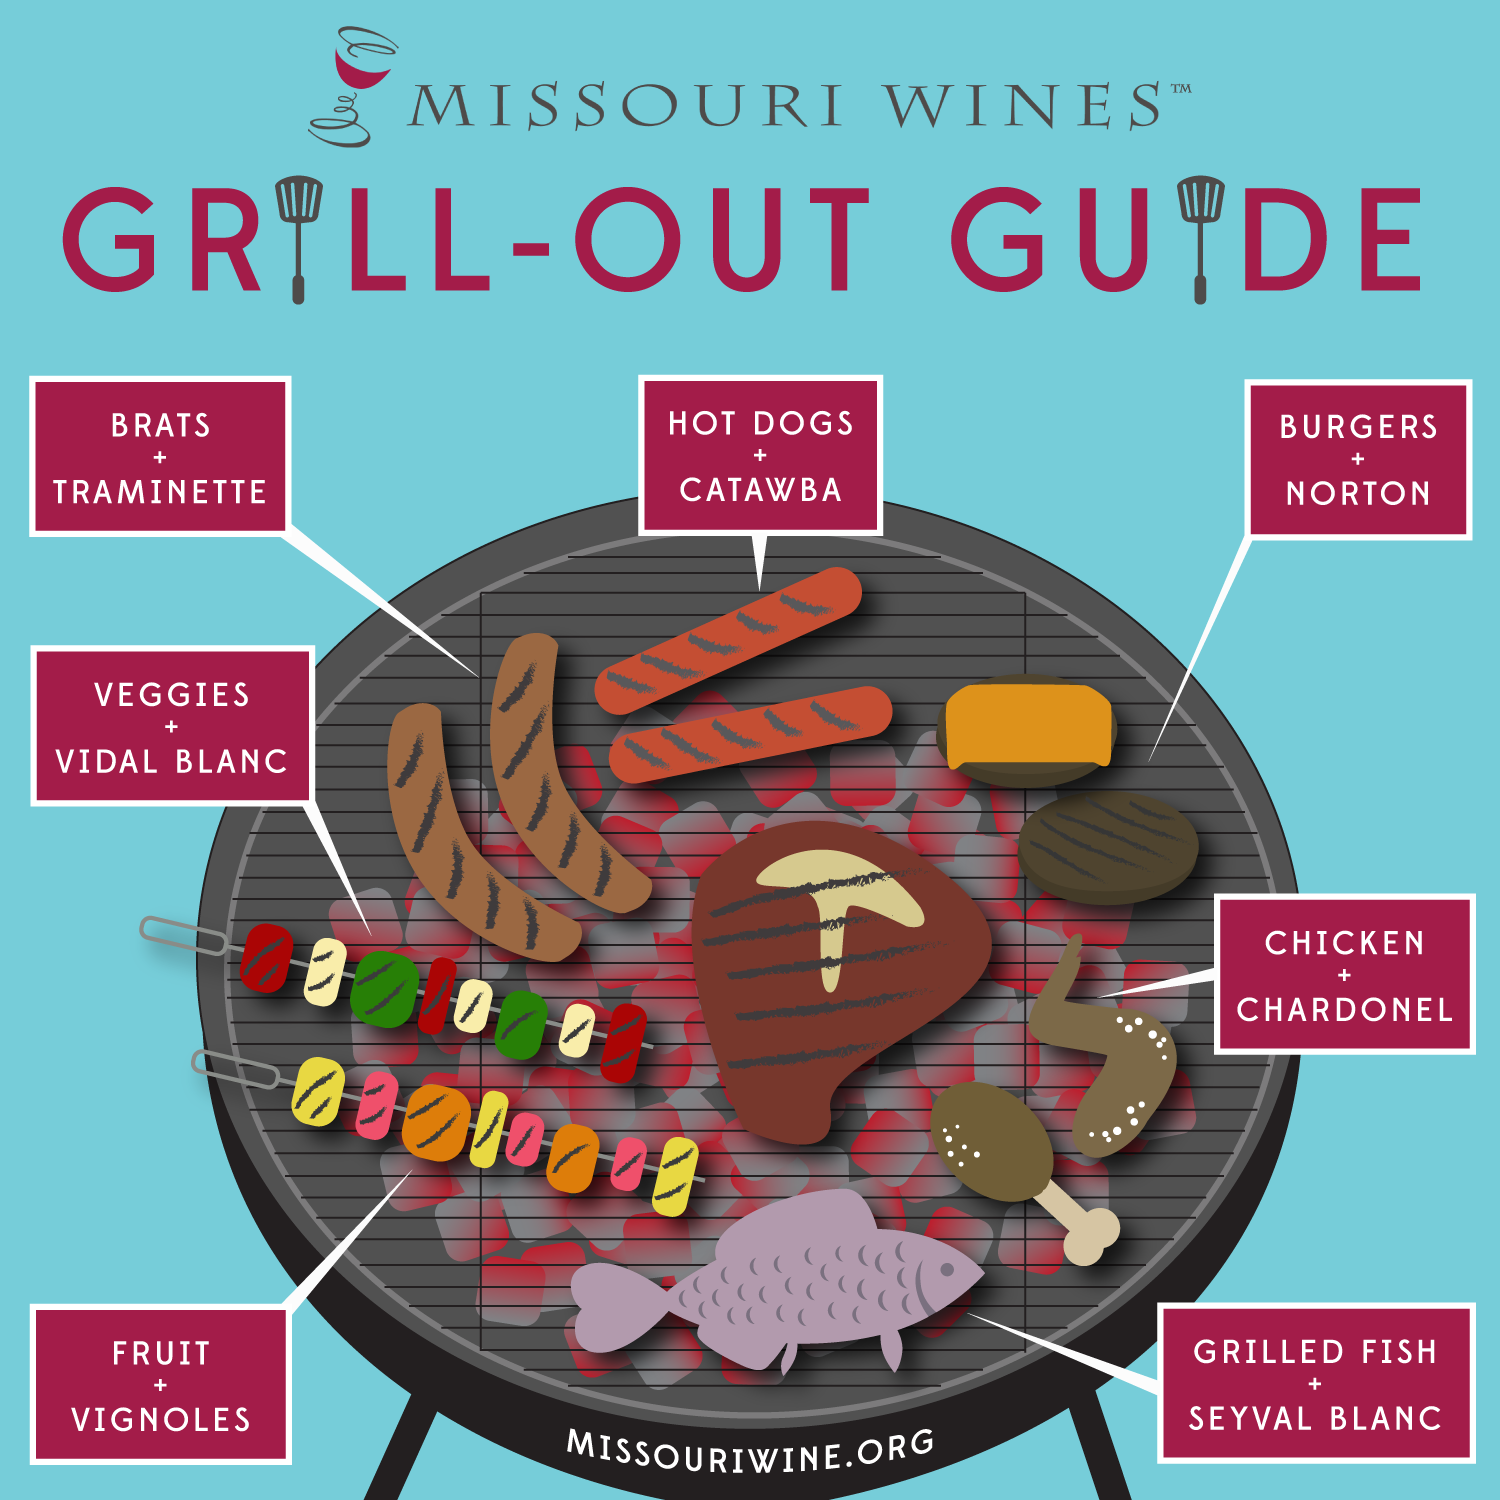 Missouri Wines Grill-Out Guide